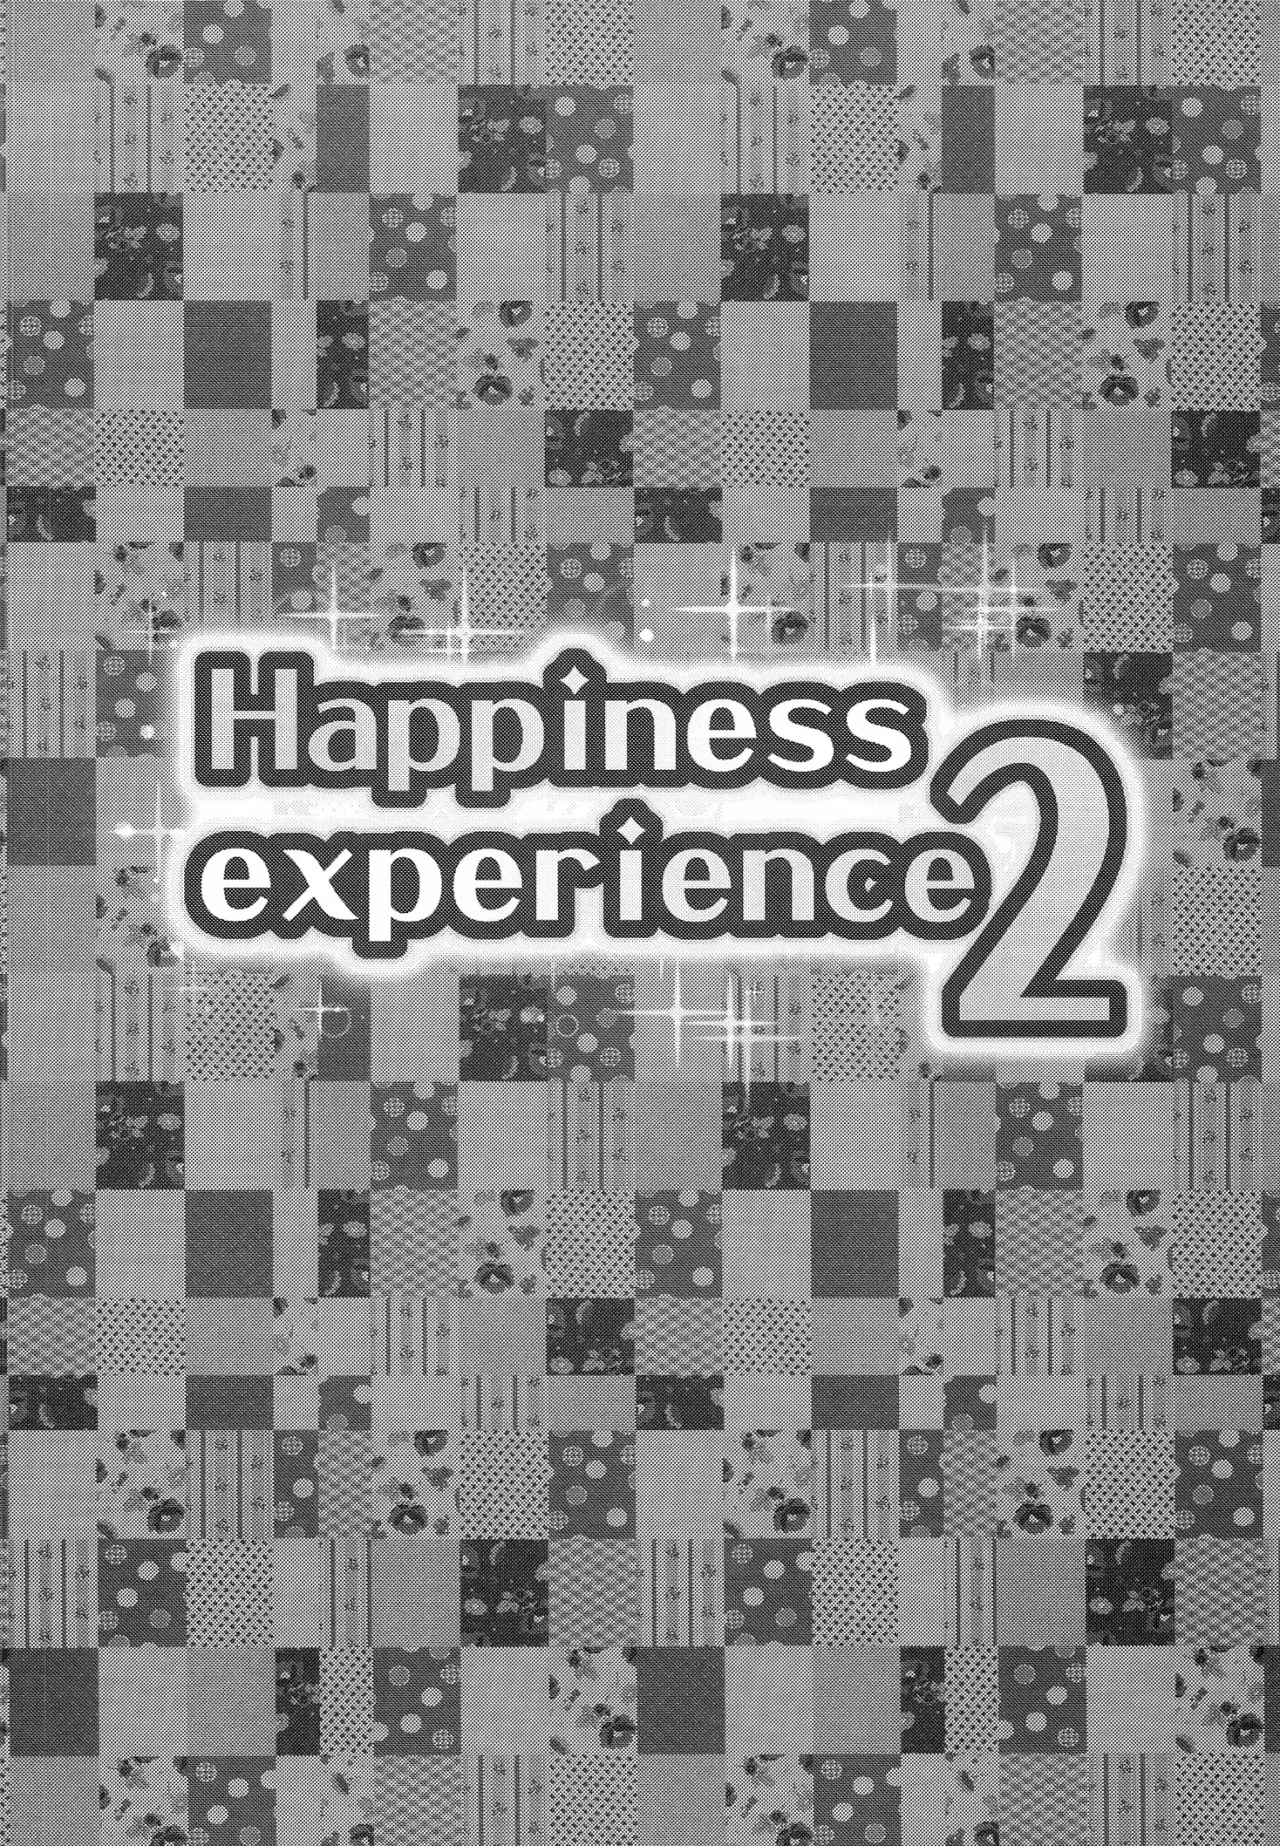 Happiness experience 1 y 2 - 40